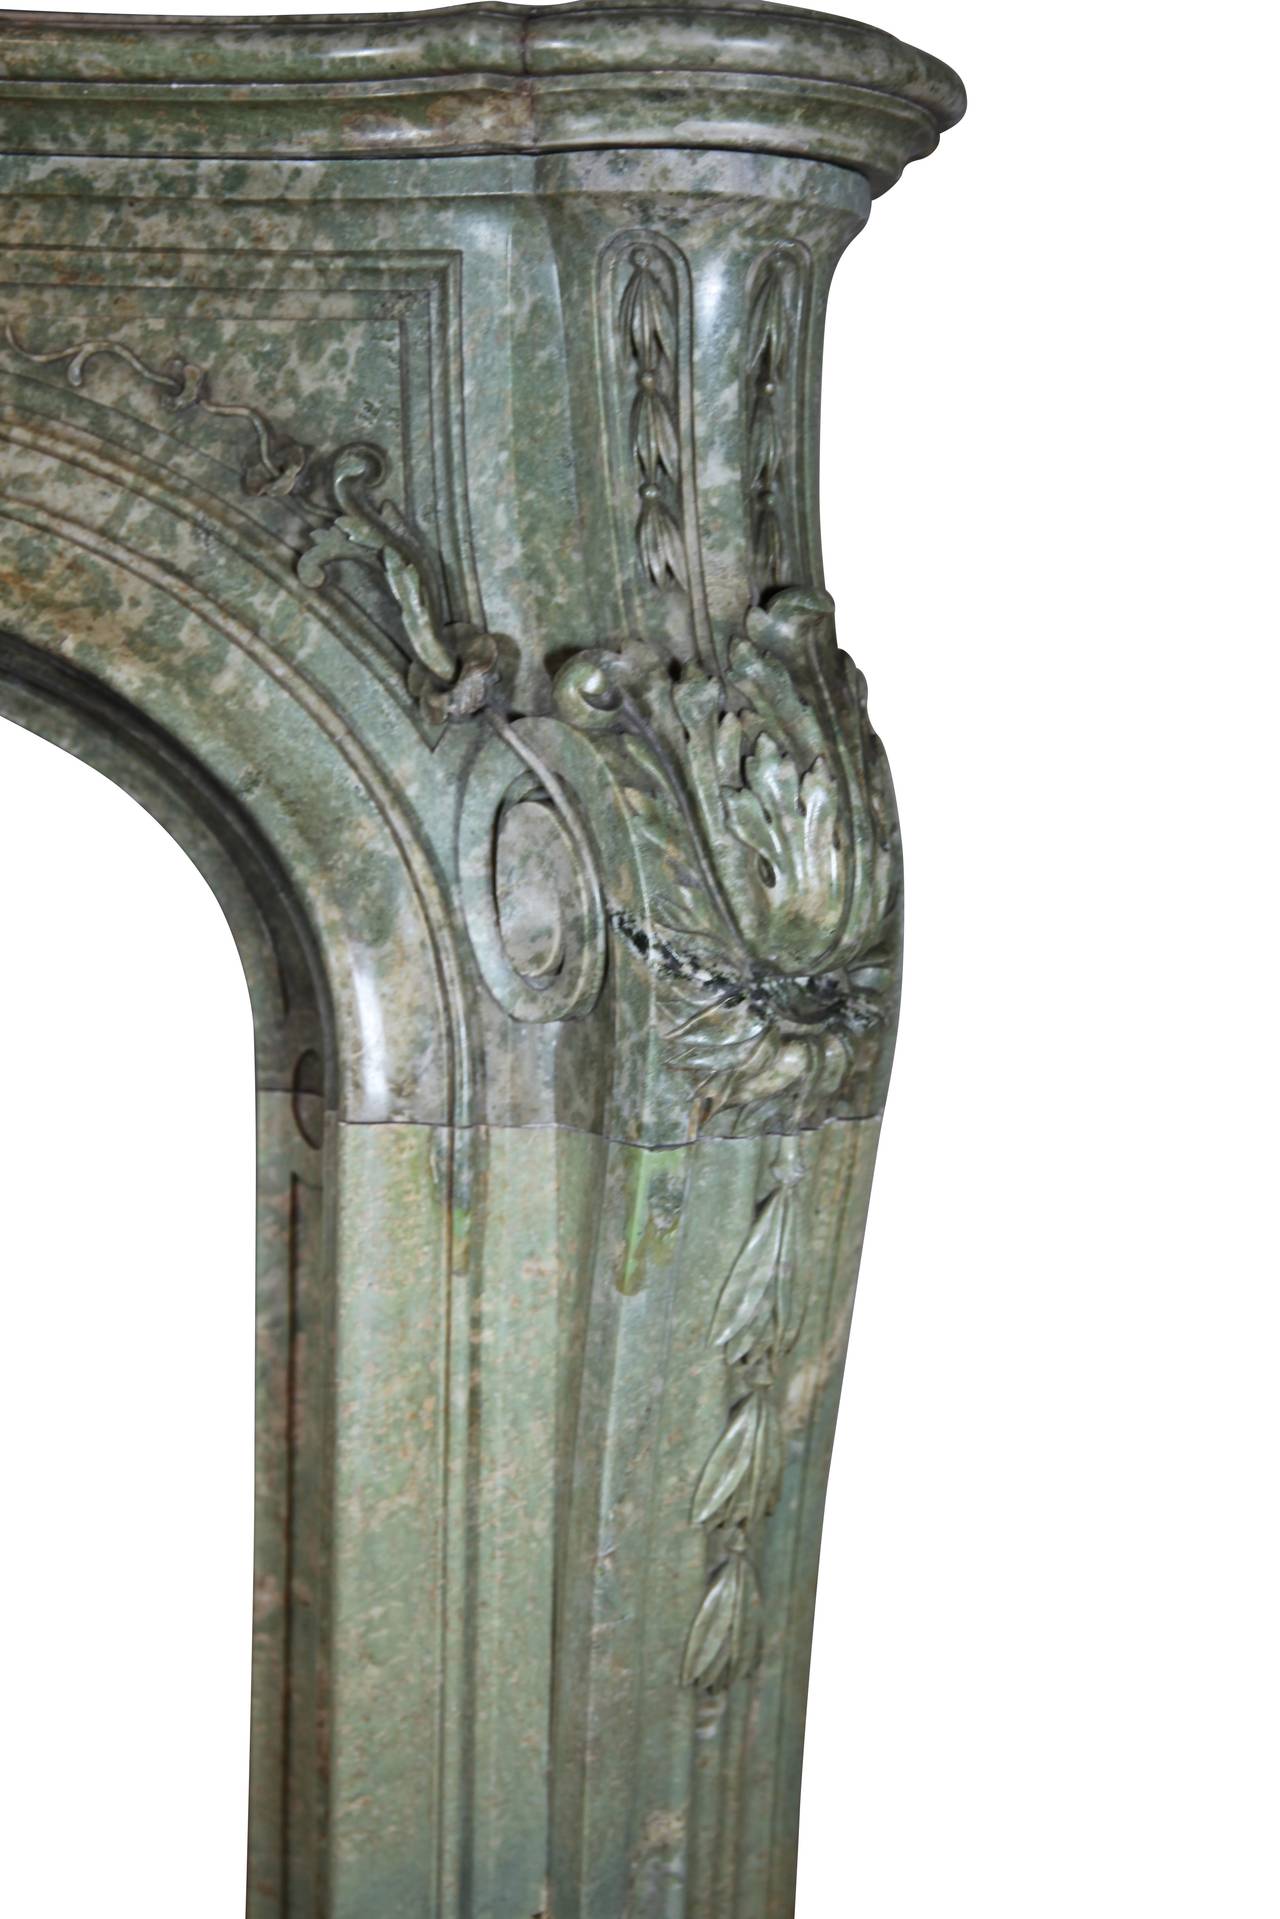 Carved 19th Century French Rococo Revival Period of the Third Republic in Green Marble